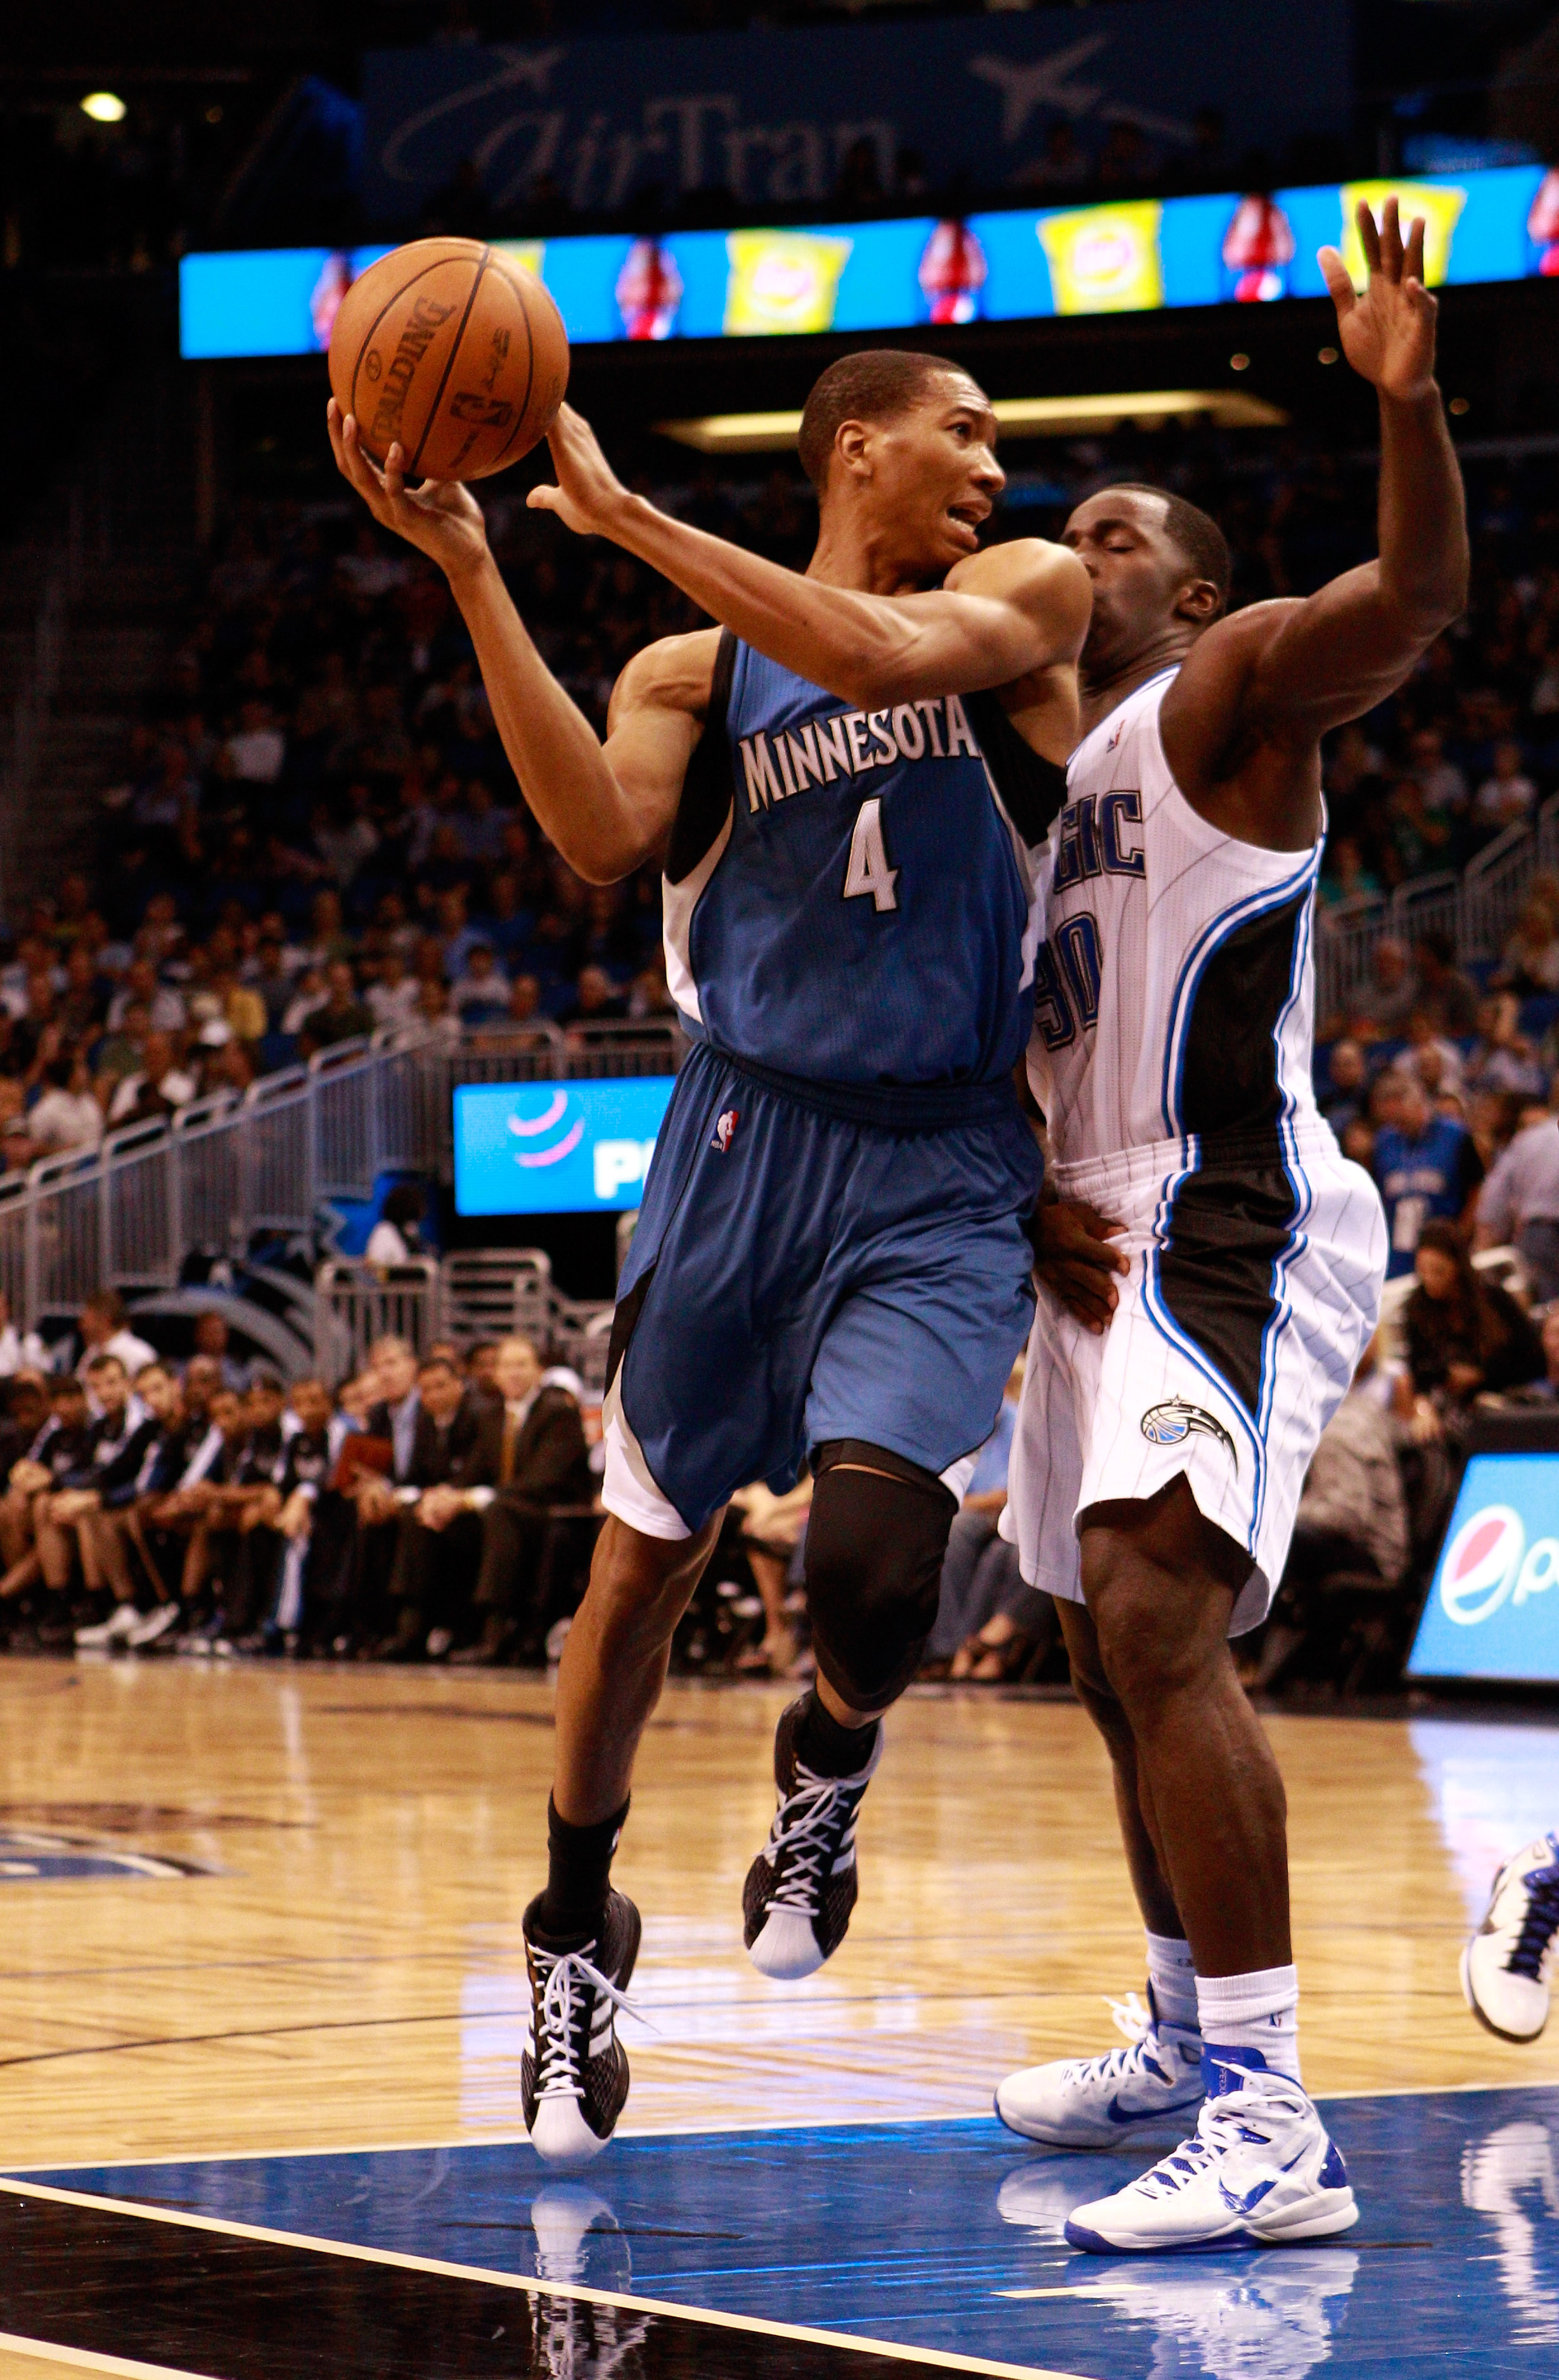 ORLANDO, FL - NOVEMBER 03:  Wesley Johnson #4 of the Minnesota Timberwolves attempts to pass against Brandon Bass #30 of the Orlando Magic during the game at Amway Arena on November 3, 2010 in Orlando, Florida.  NOTE TO USER: User expressly acknowledges a